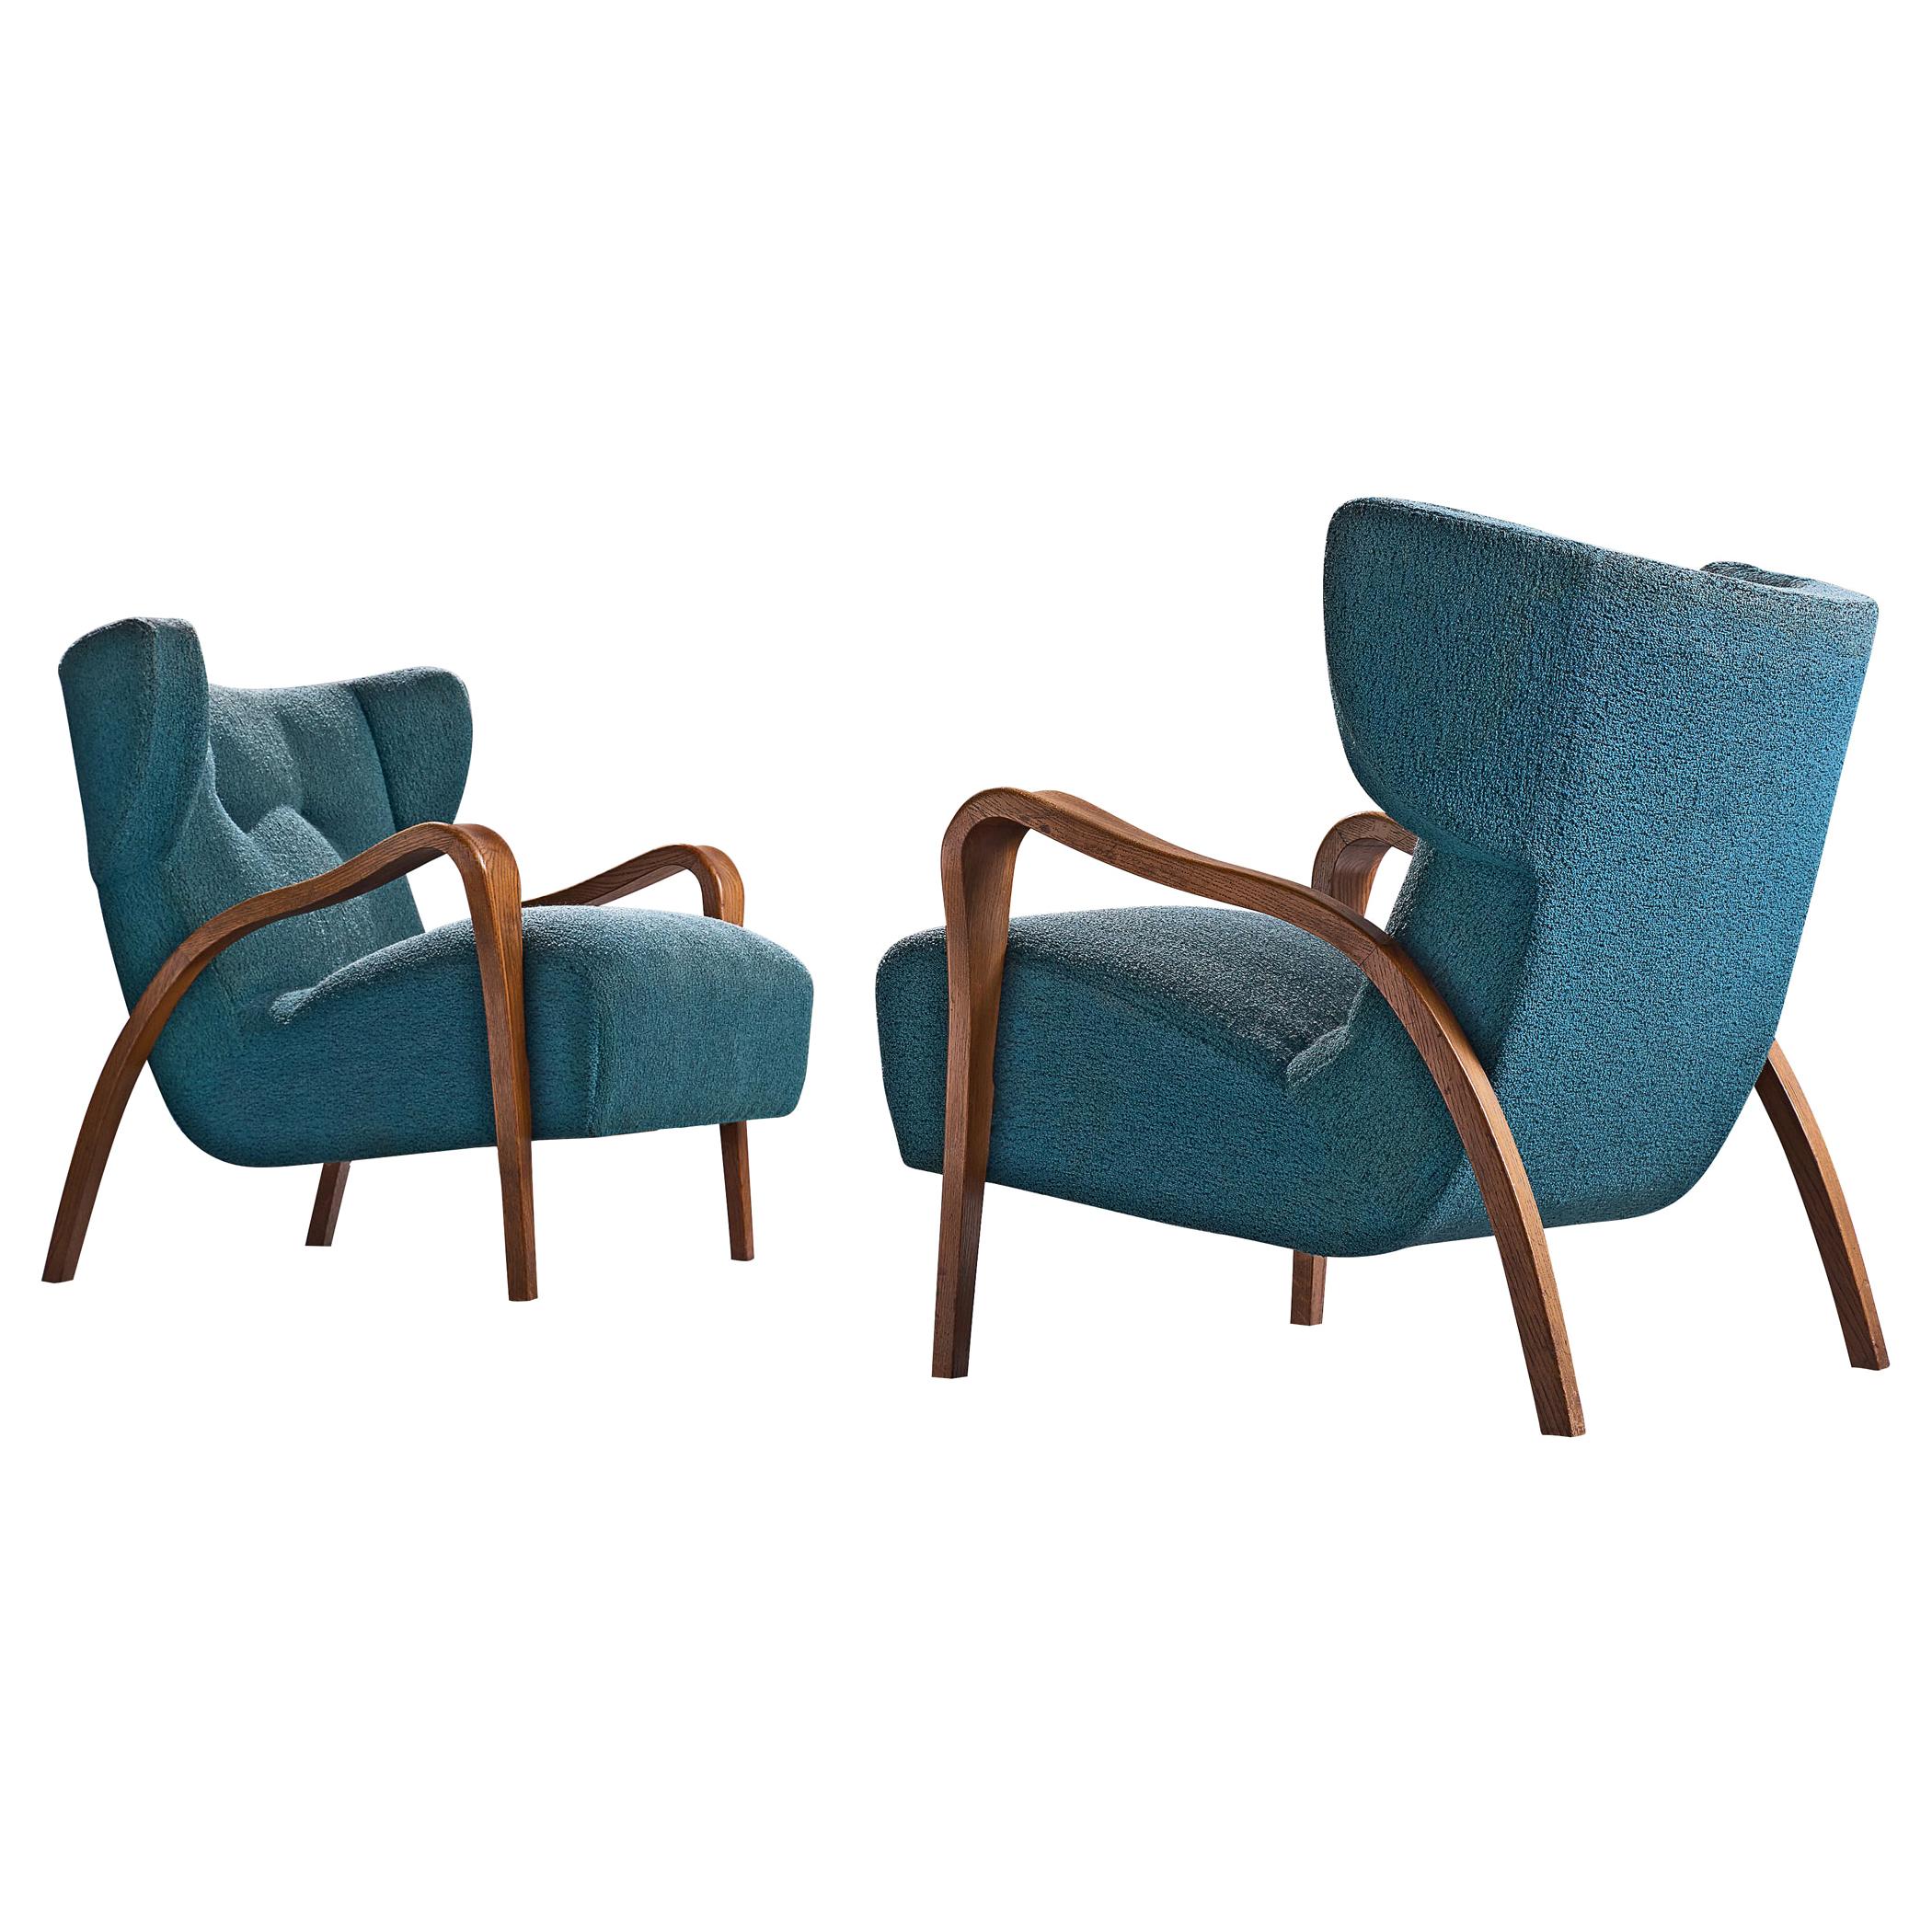 Pair of French Wingback Chairs in Blue Fabric